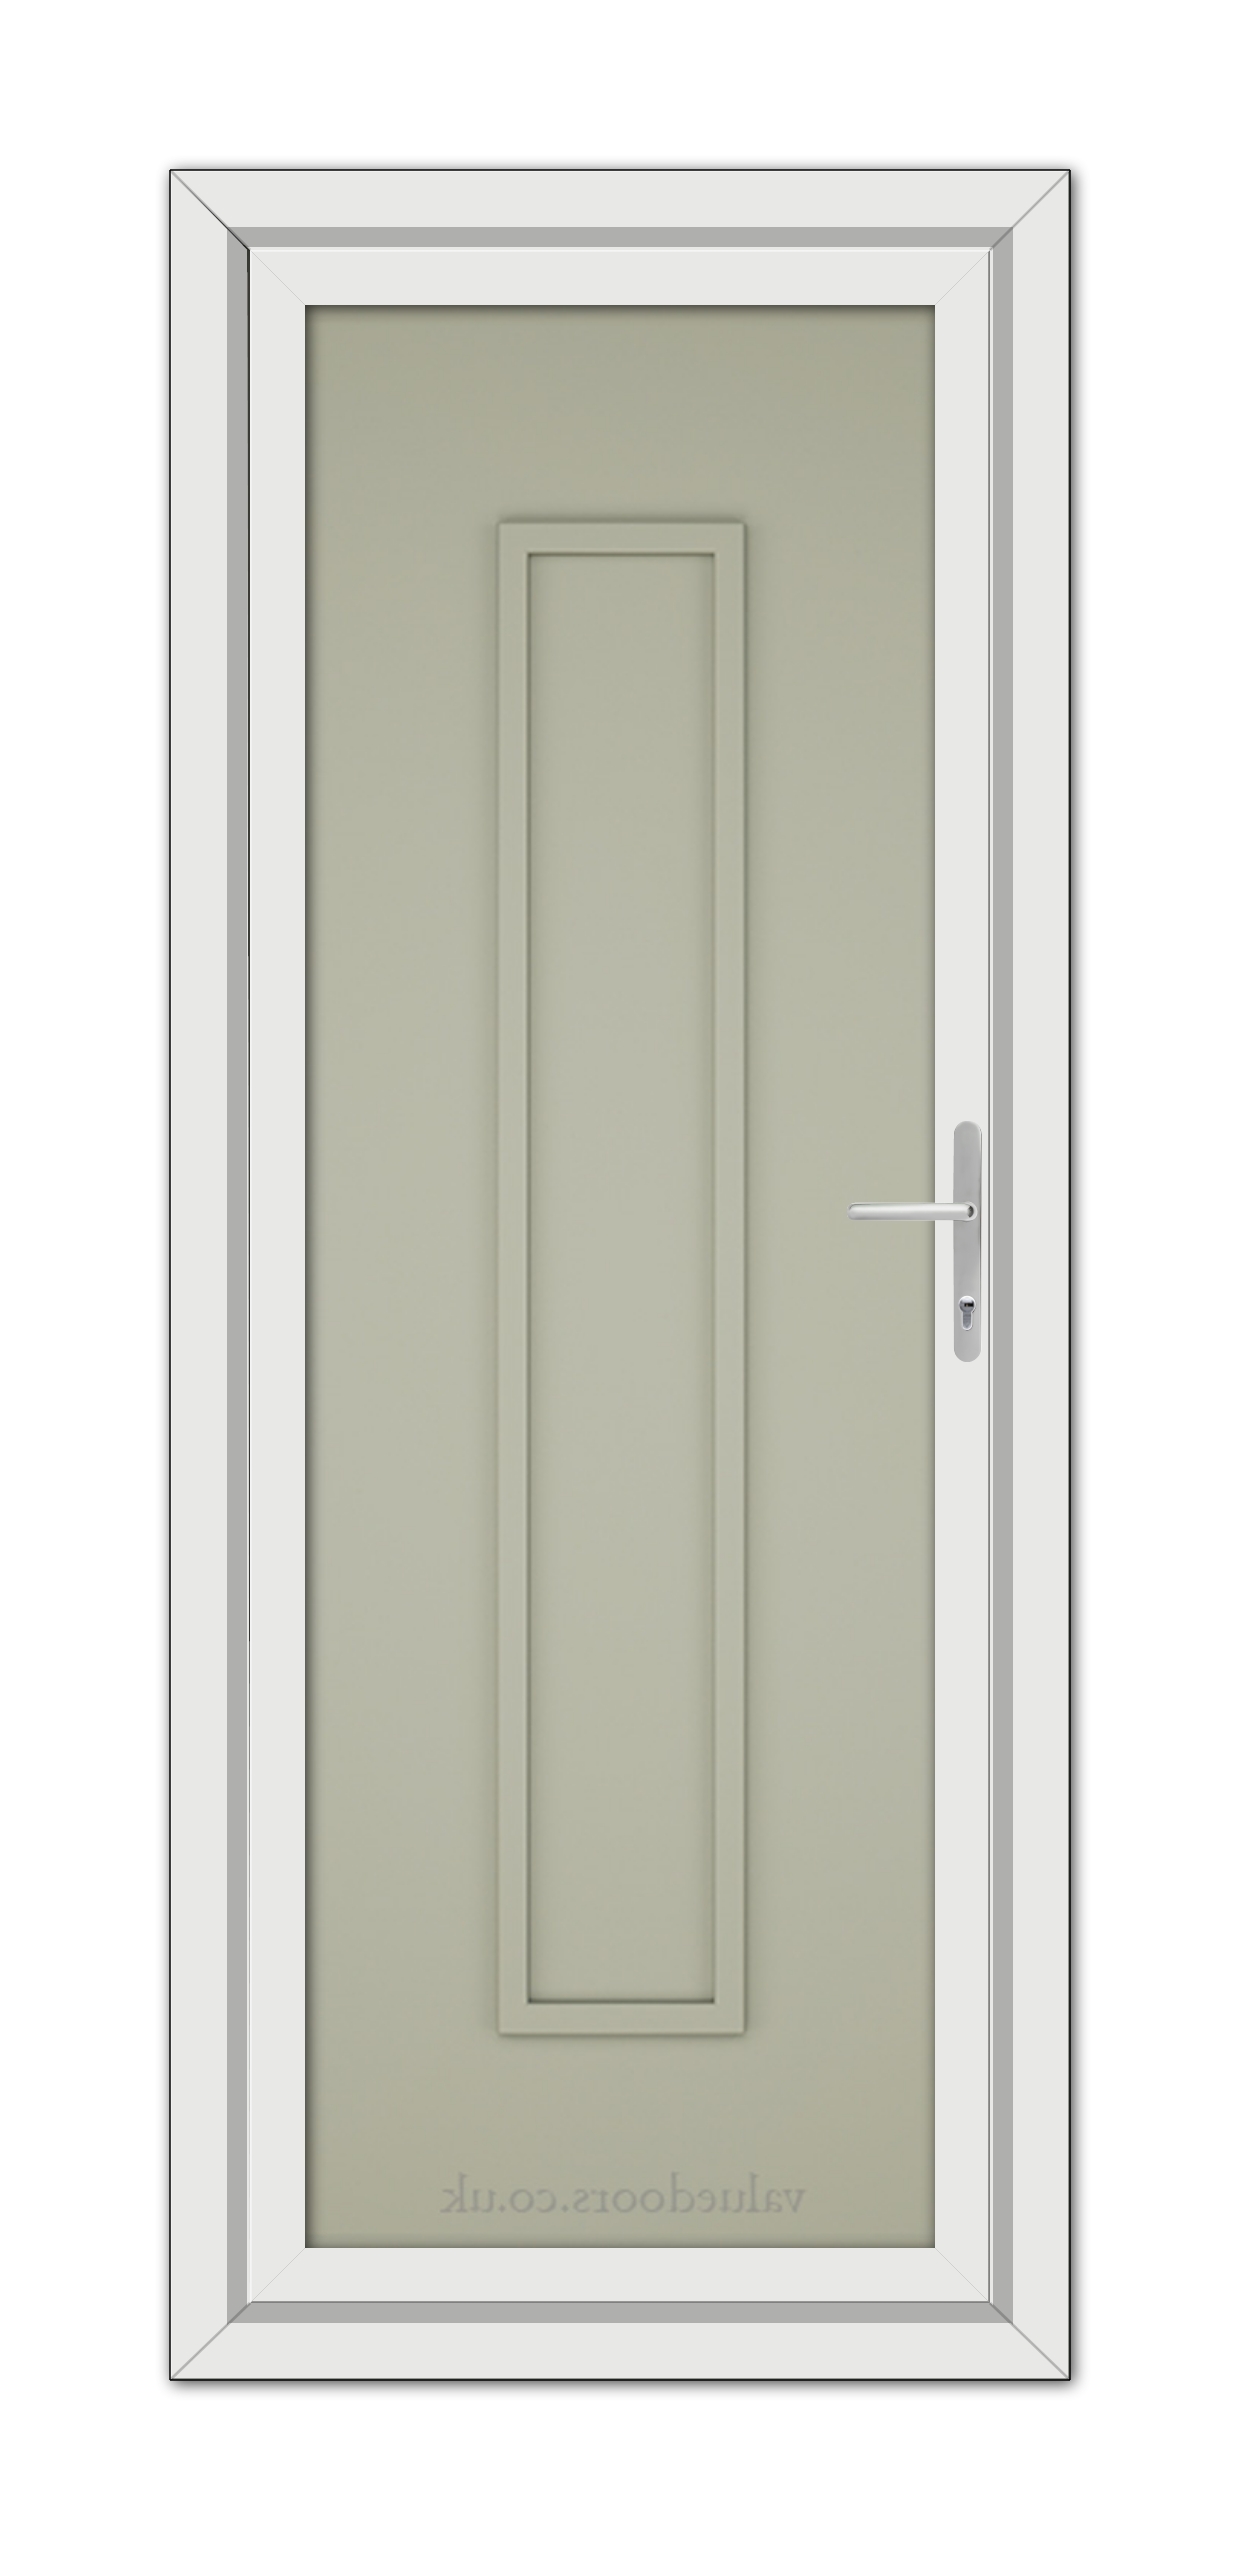 A Agate Grey Modern 5101 Solid uPVC Door with a vertical rectangular panel and a silver handle, set within a white frame.